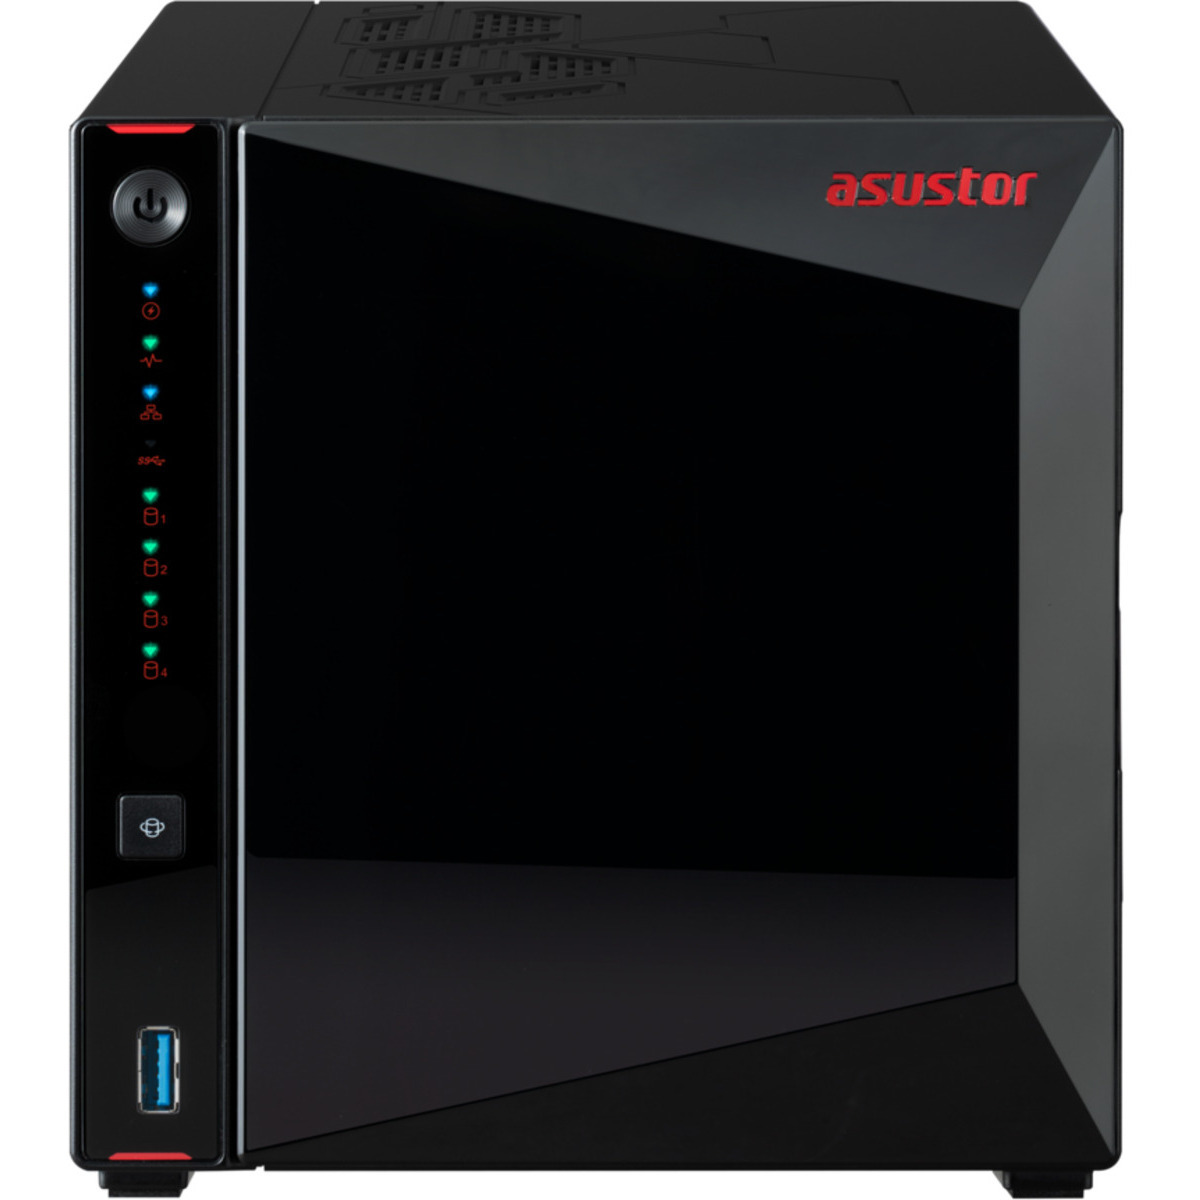 buy $2193 ASUSTOR Nimbustor 4 Gen2 AS5404T 80tb Desktop NAS - Network Attached Storage Device 4x20000gb Seagate EXOS X20 ST20000NM007D 3.5 7200rpm SATA 6Gb/s HDD ENTERPRISE Class Drives Installed - Burn-In Tested - FREE RAM UPGRADE - nas headquarters buy network attached storage server device das new raid-5 free shipping simply usa Nimbustor 4 Gen2 AS5404T